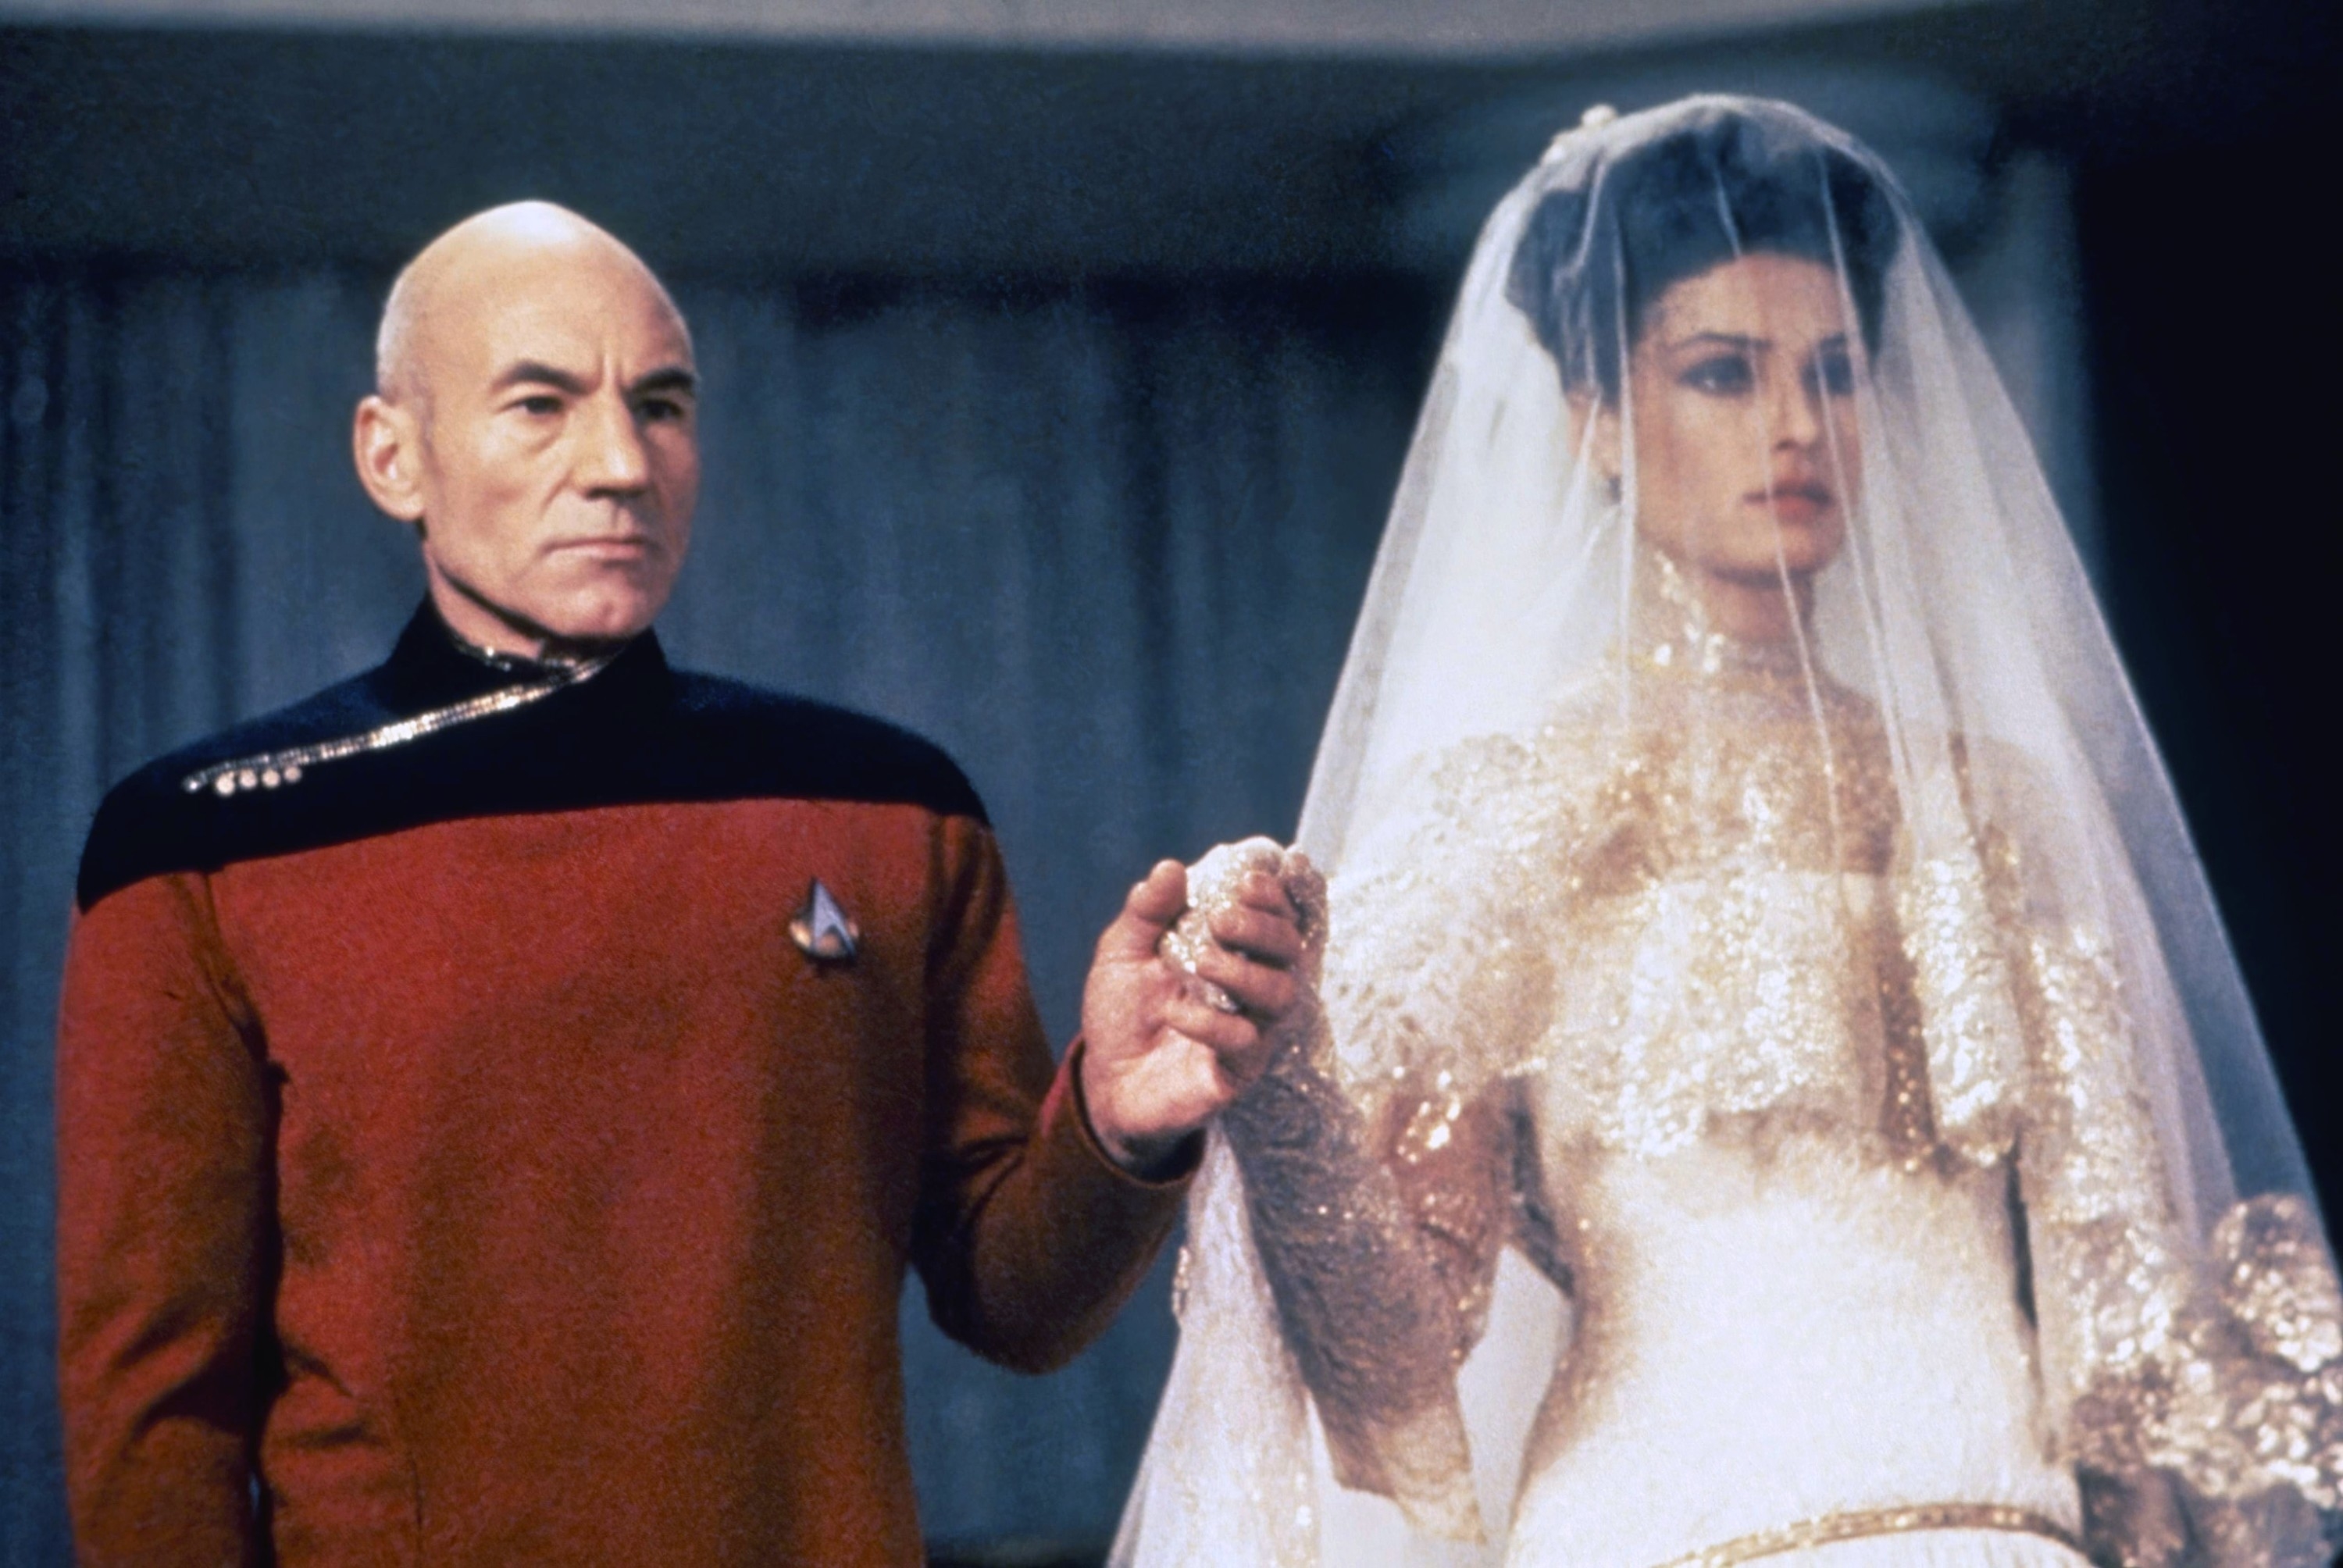 Captain Picard in uniform beside a character in a bridal gown on the Star Trek set